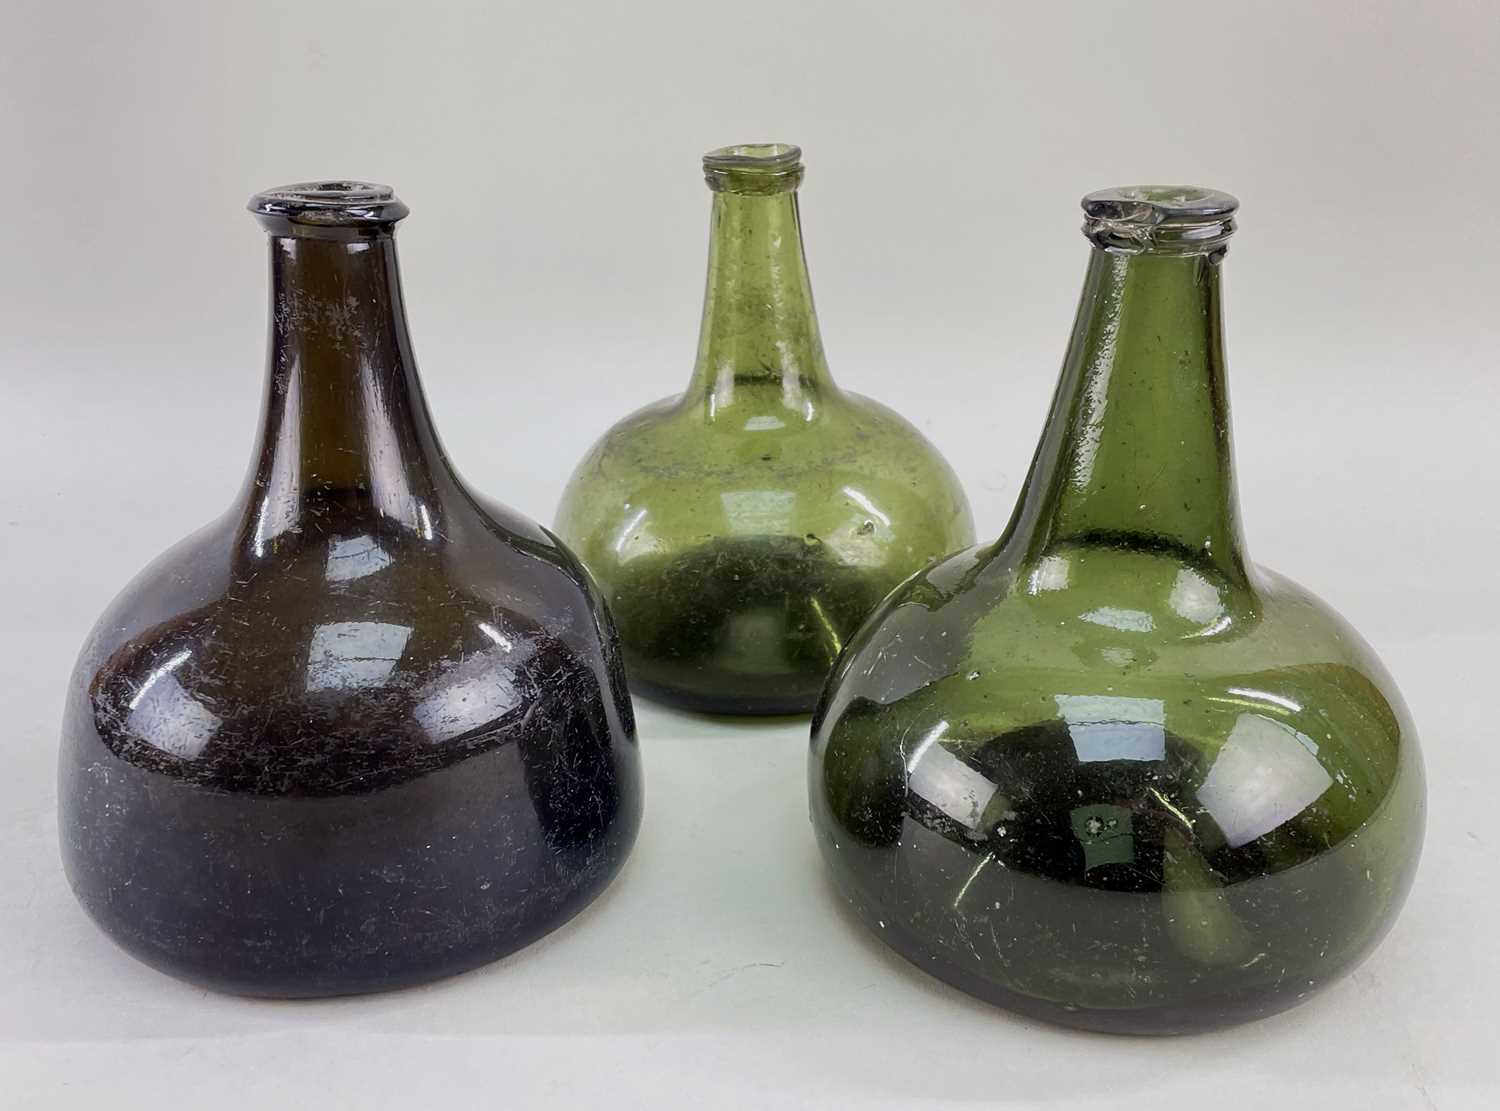 THREE GLASS 'ONION' WINE BOTTLES, 2 olive green, 1 forest green, all compressed, 18th Century,